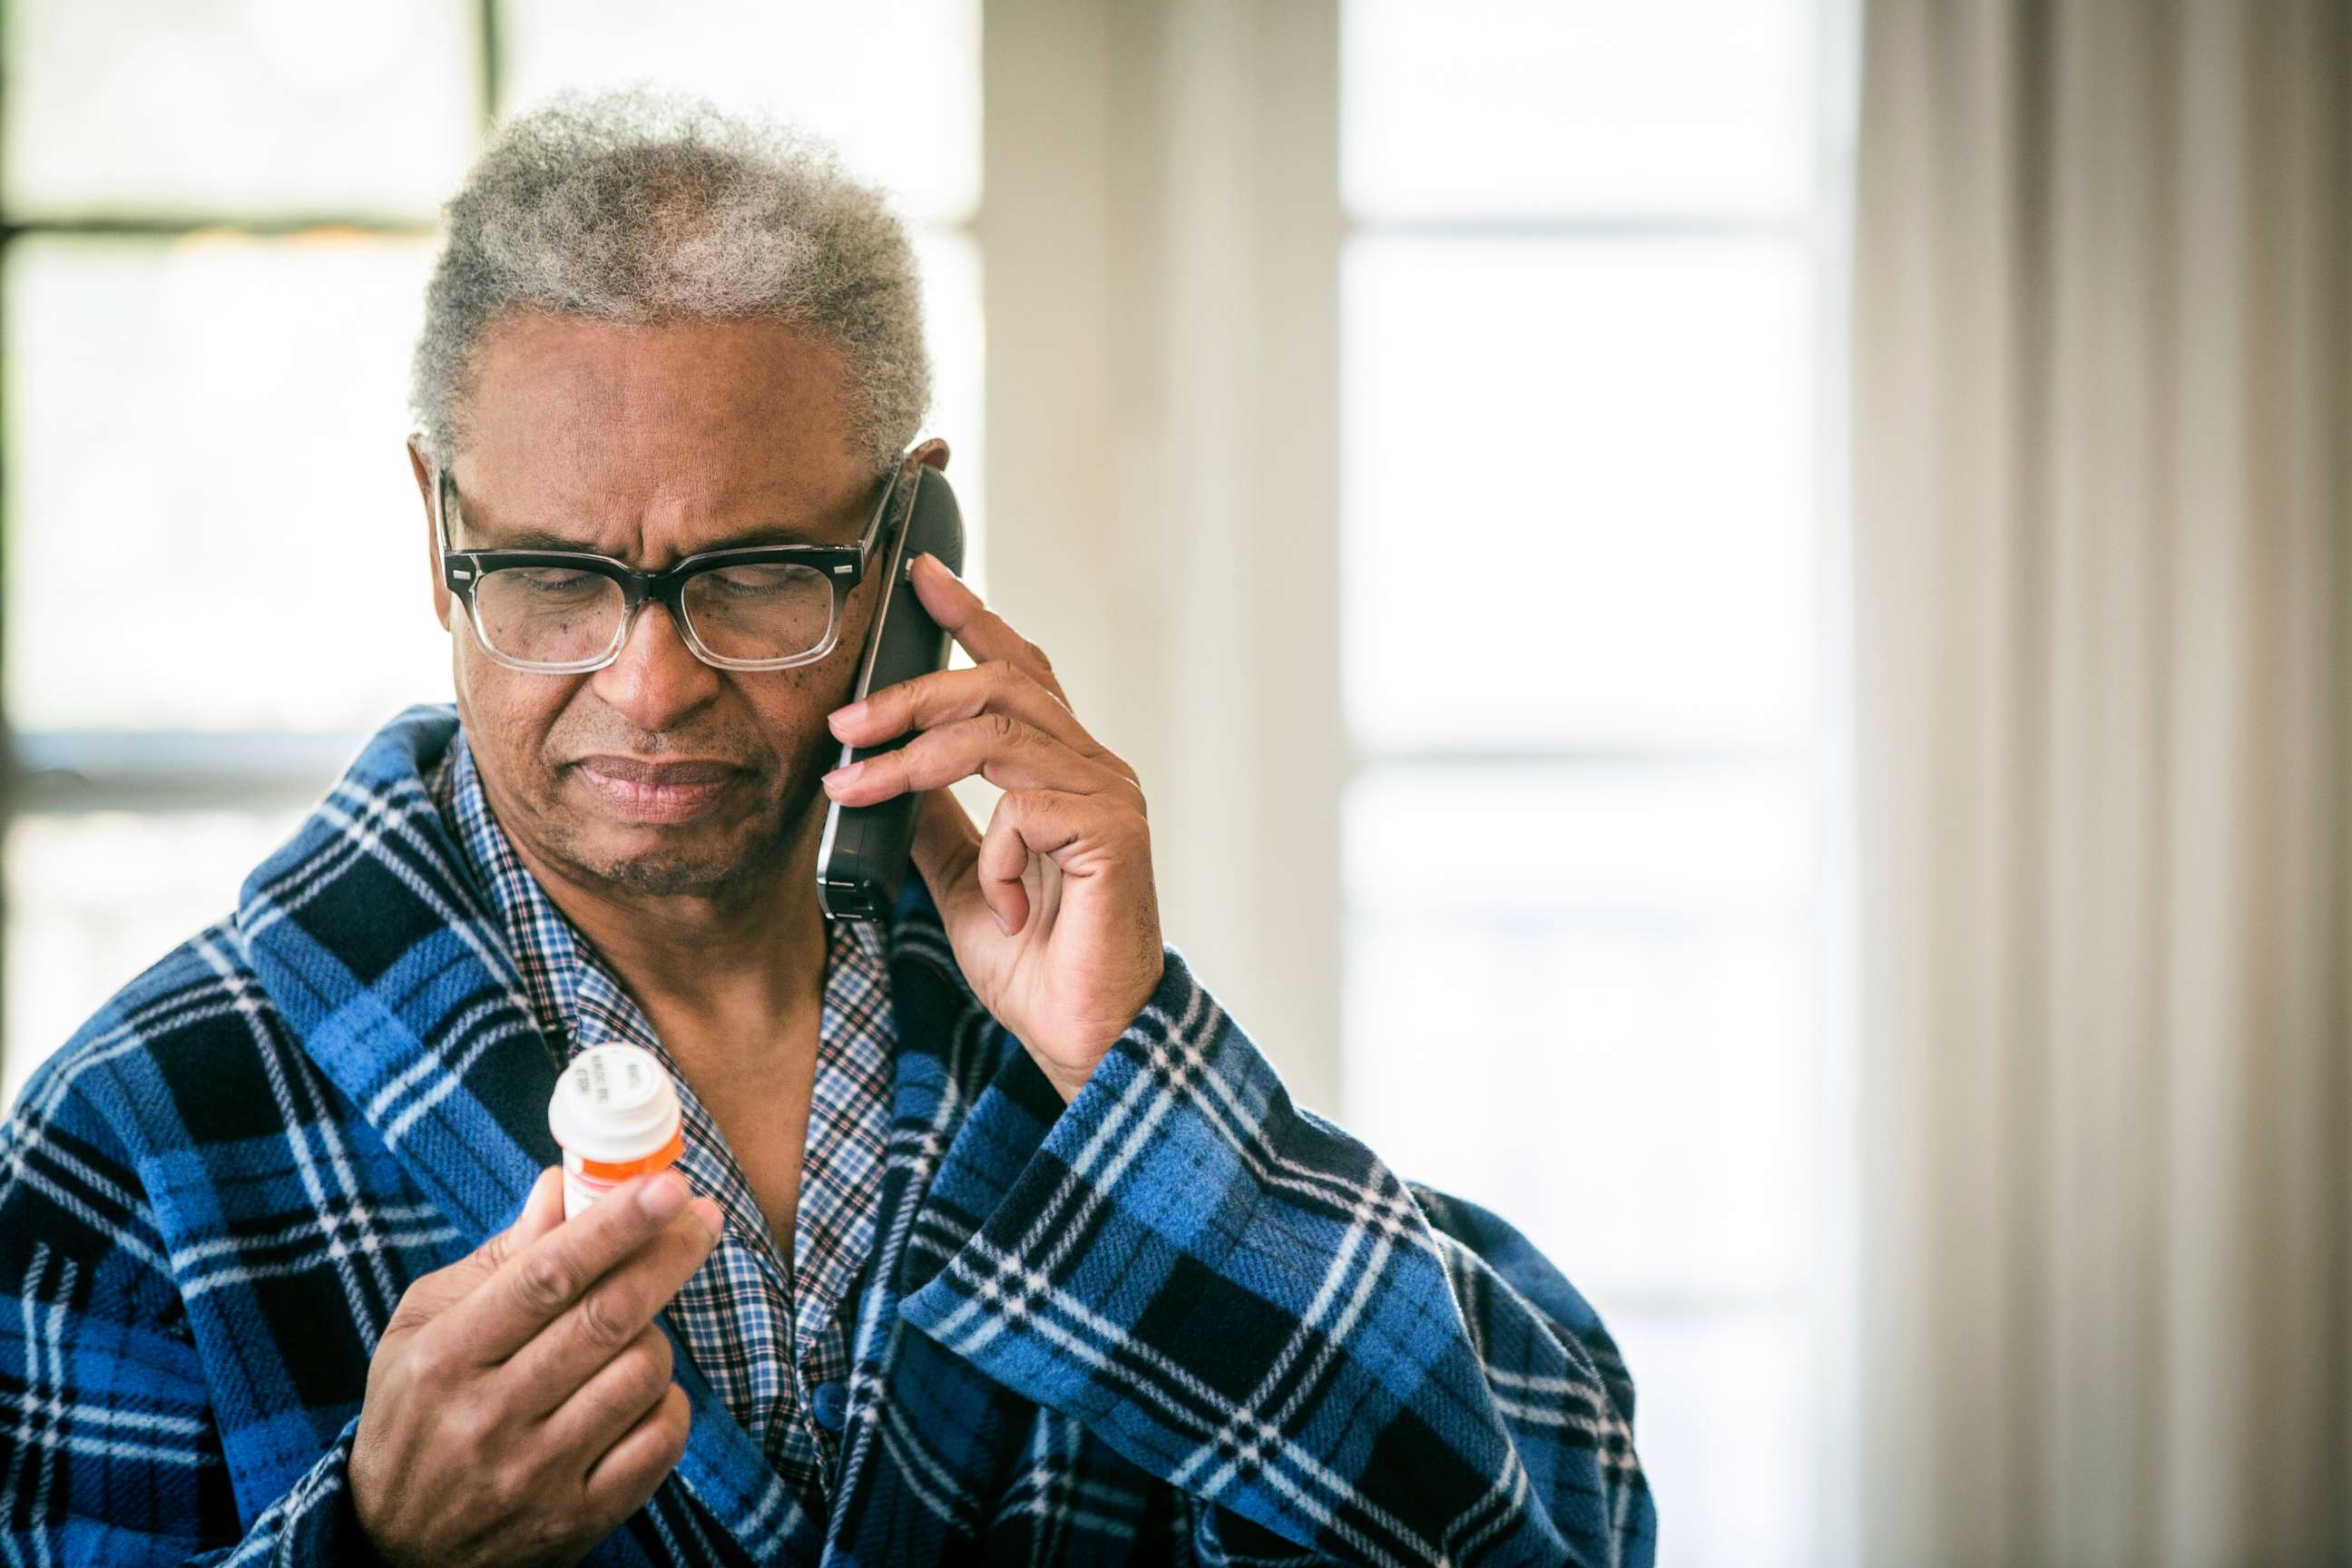 PHOTO: A man refills his prescription by phone in this stock photo.